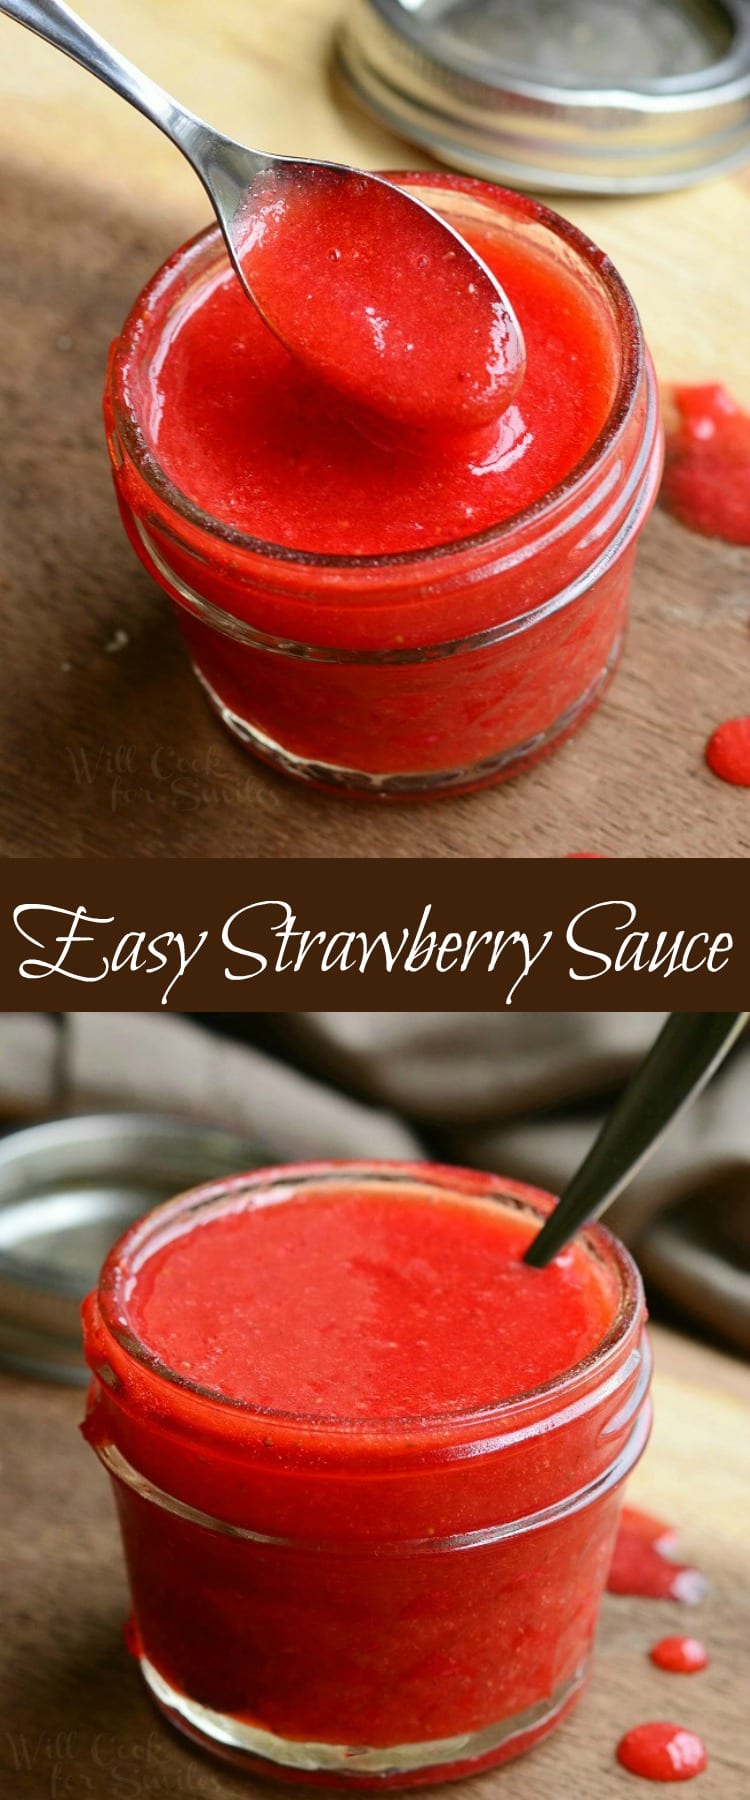 Easy Strawberry Sauce collage 